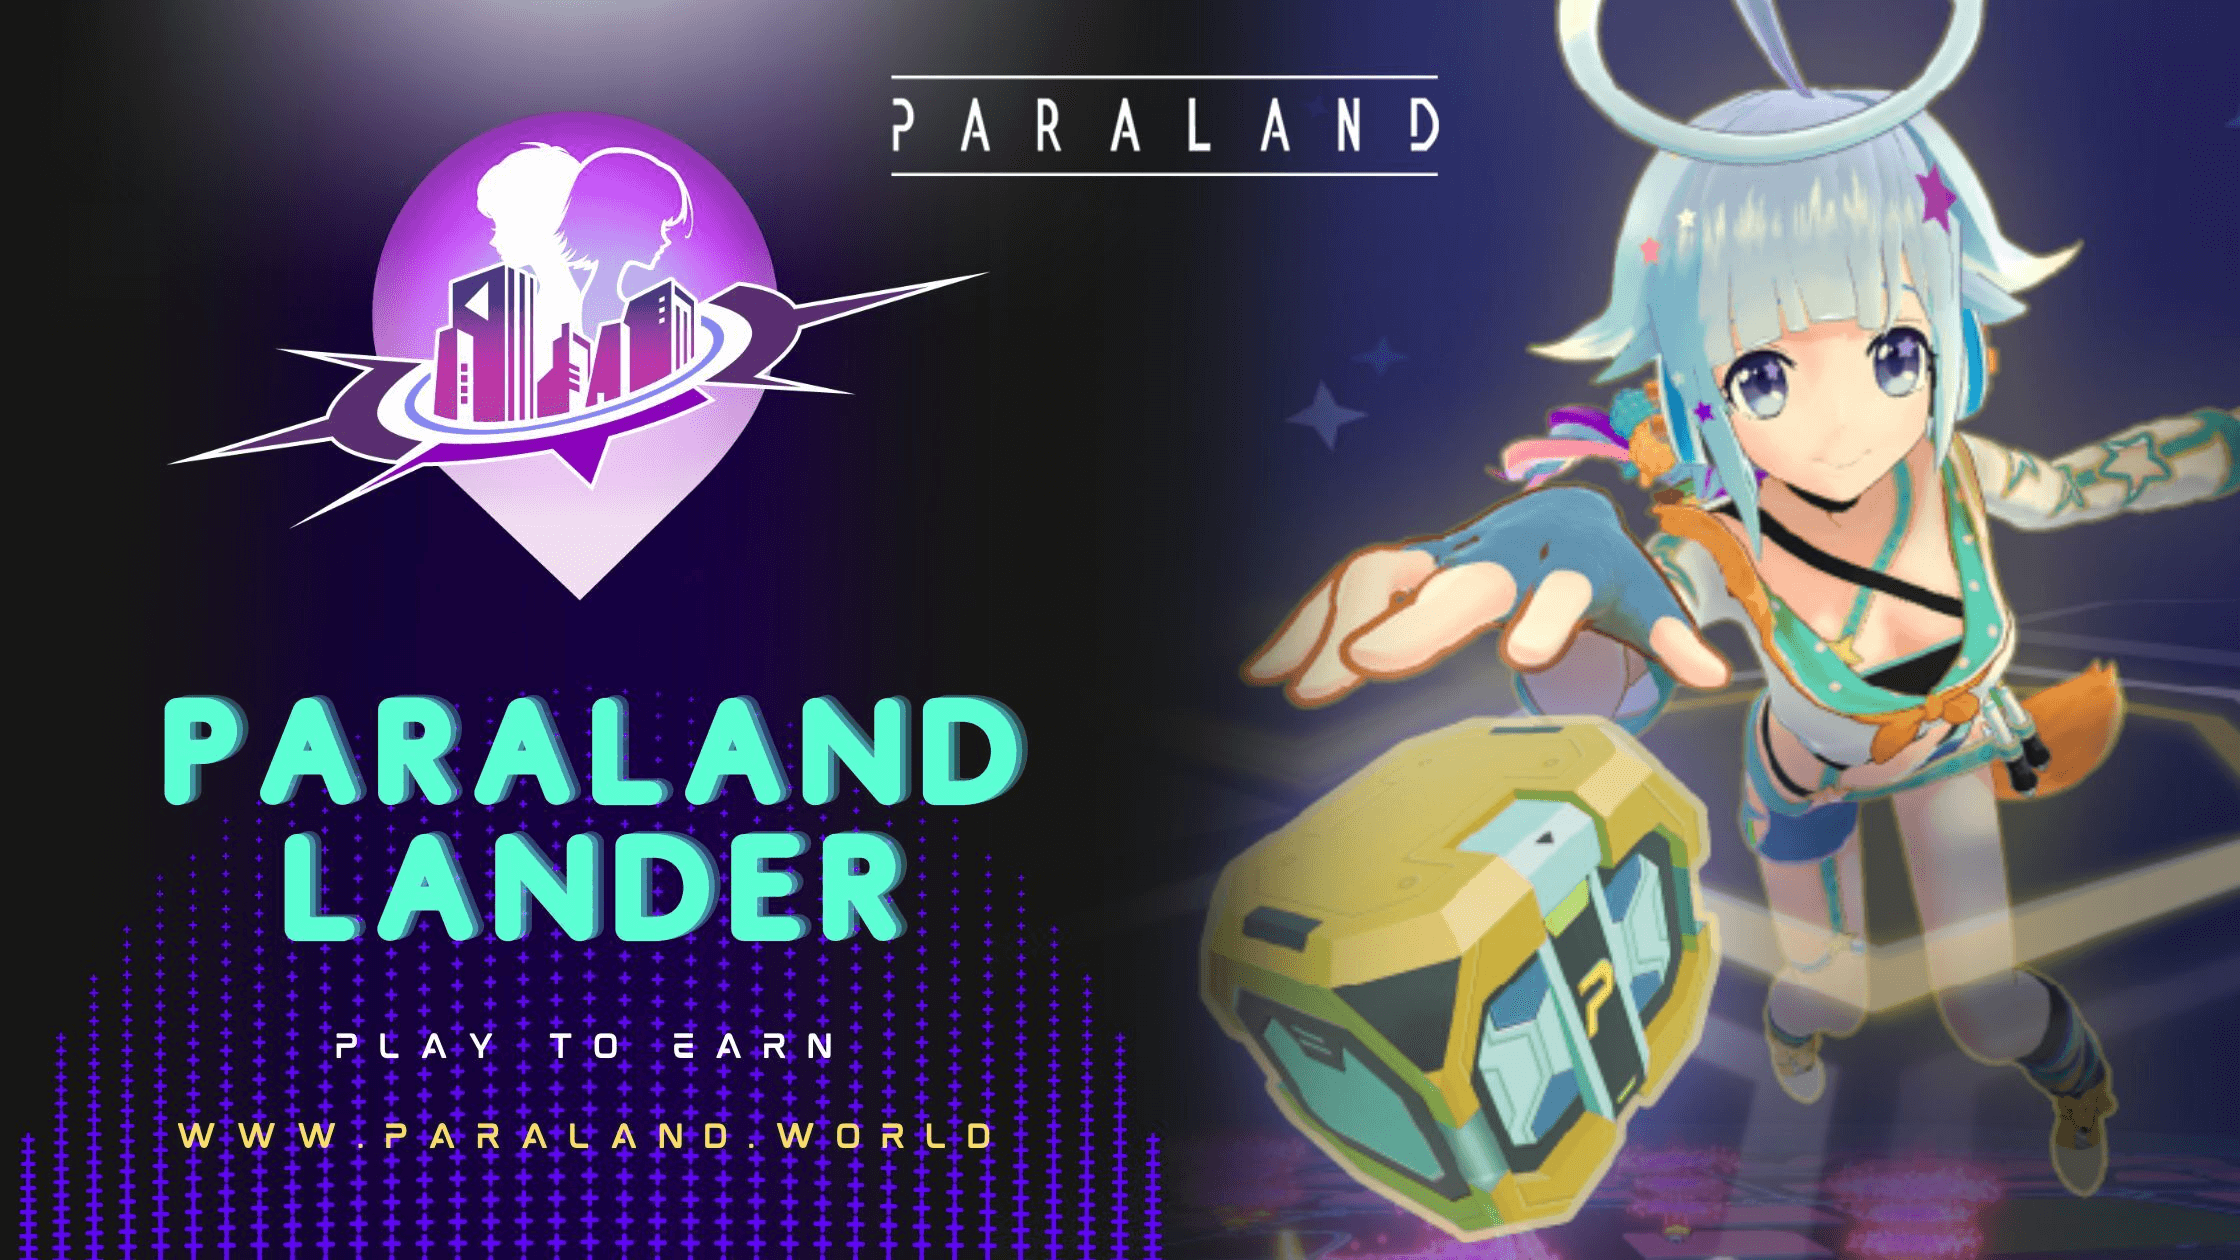 Lander leading Jumpers and play-to-earn in PARALAND